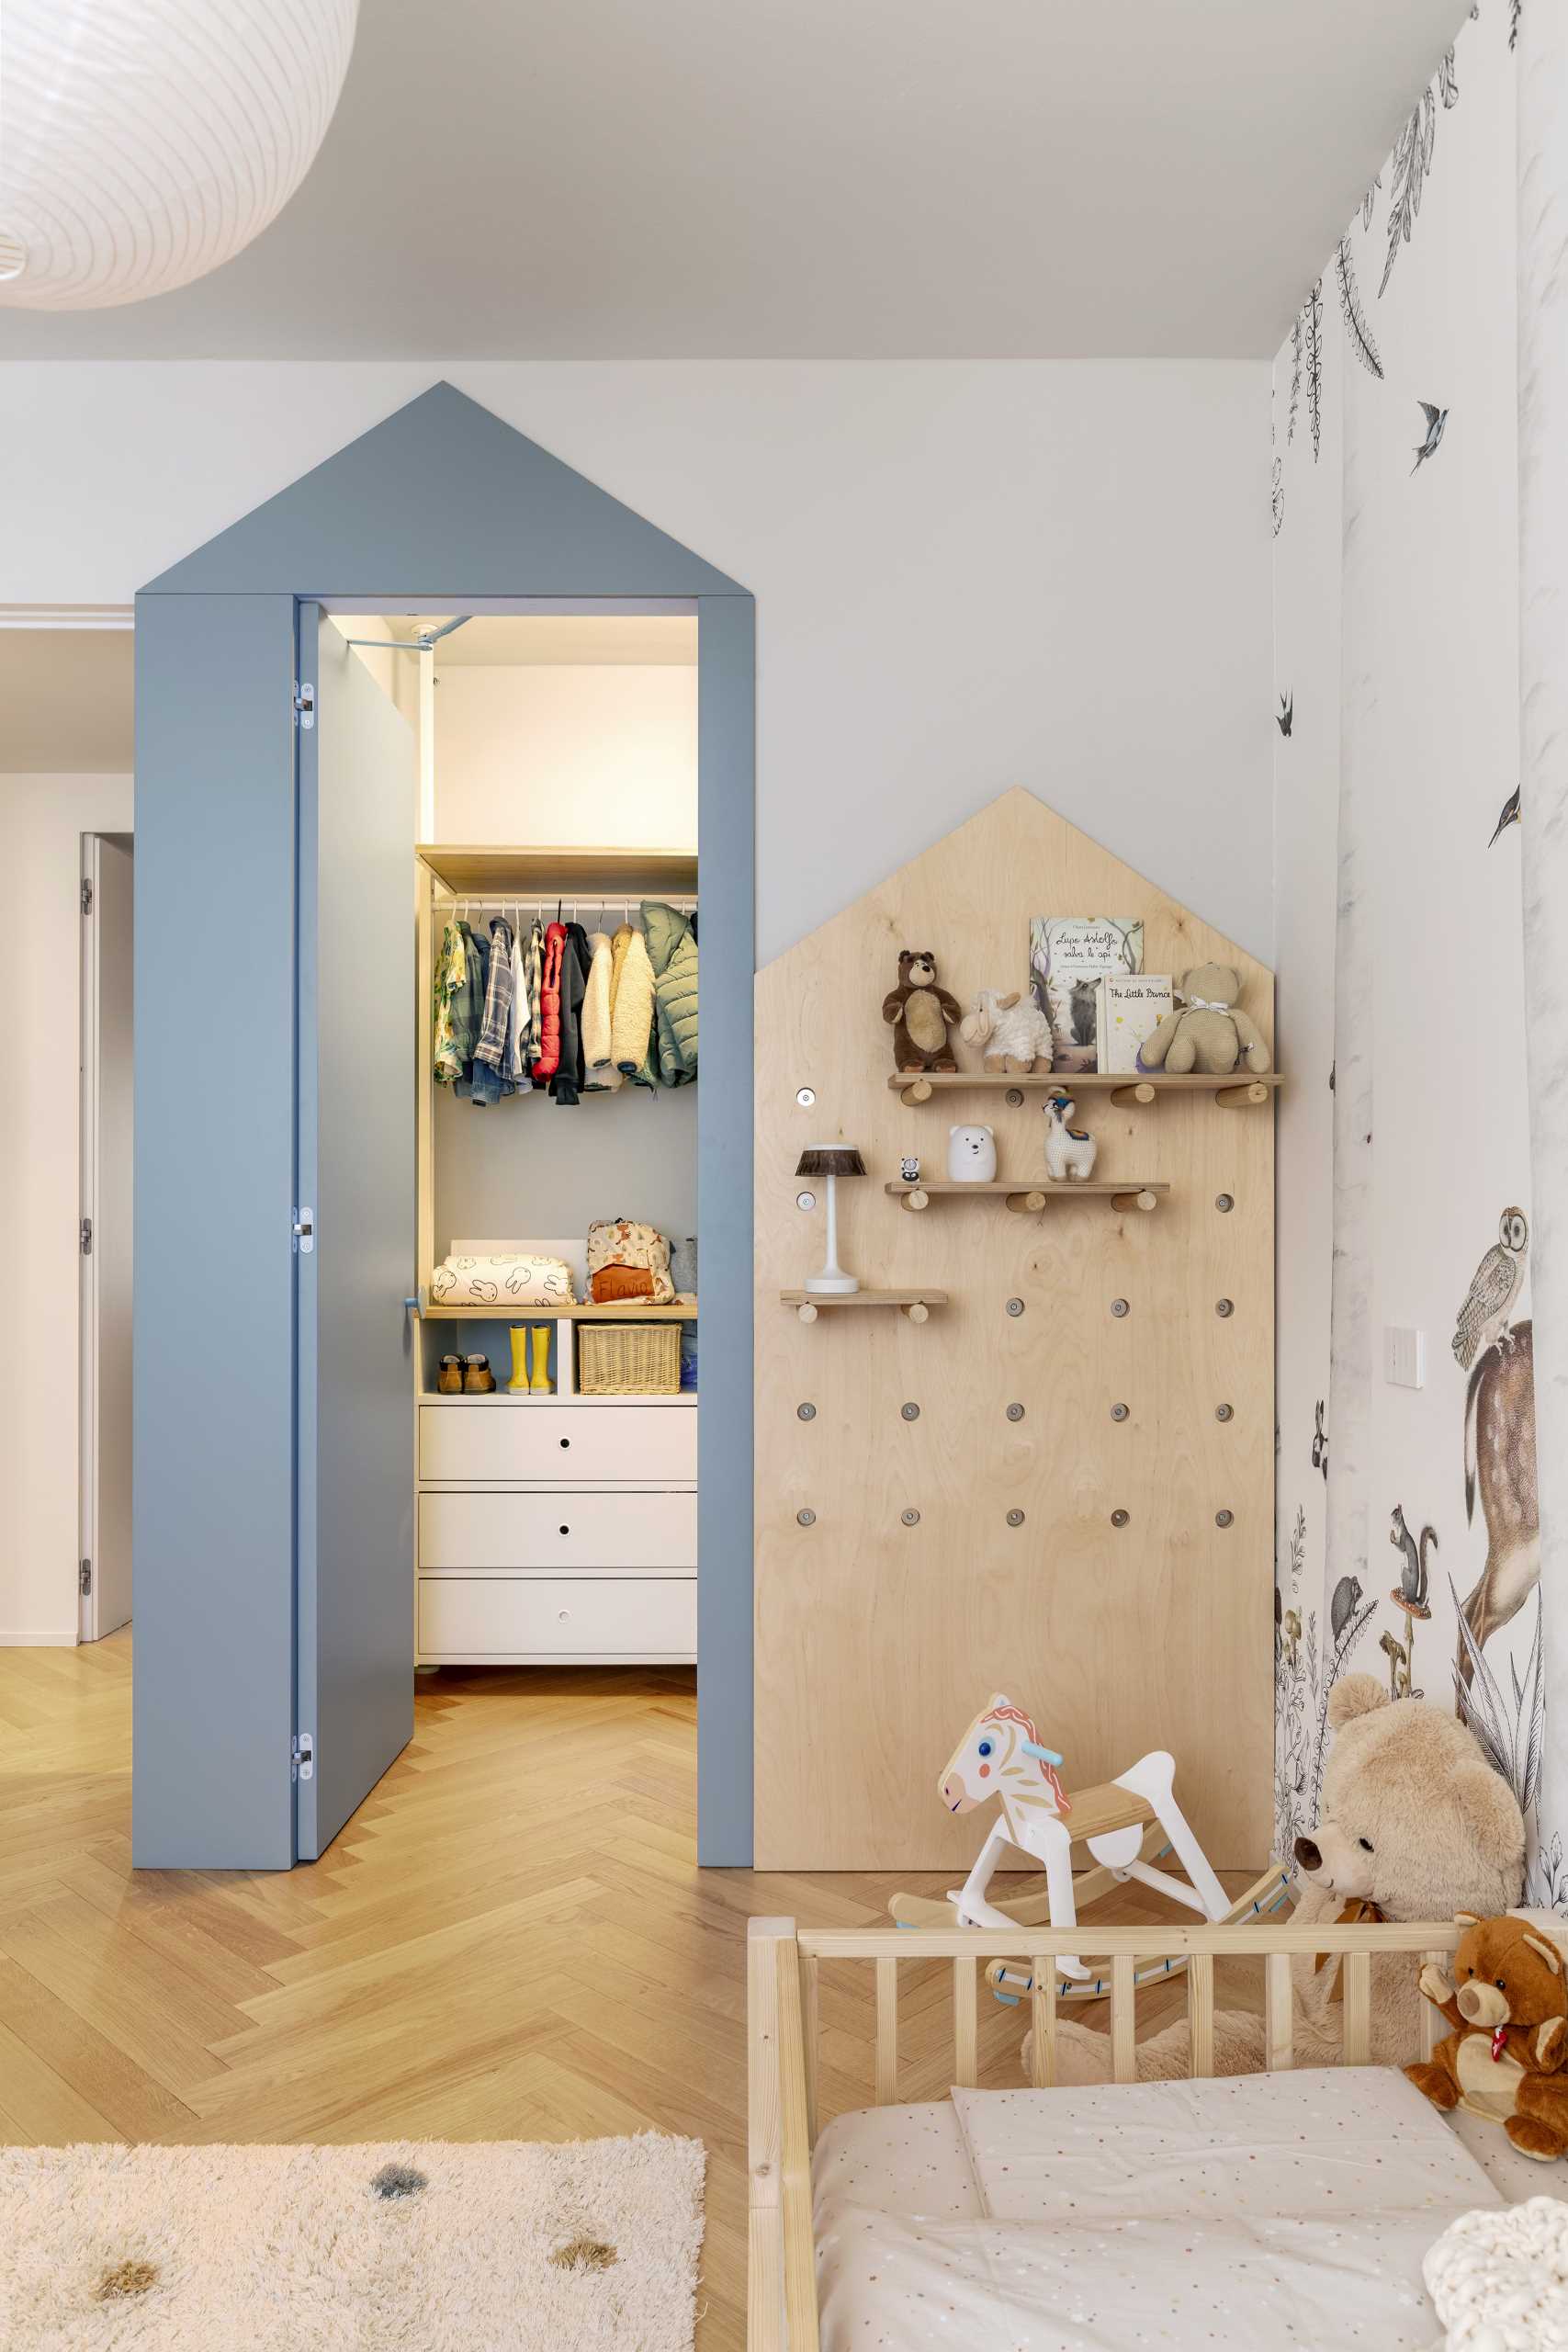 In a child's bedroom, a soft dusty blue has been used to create a contemporary and fun look that also includes a walk-in closet, a pegboard wall with shelves, and a woodland mural.